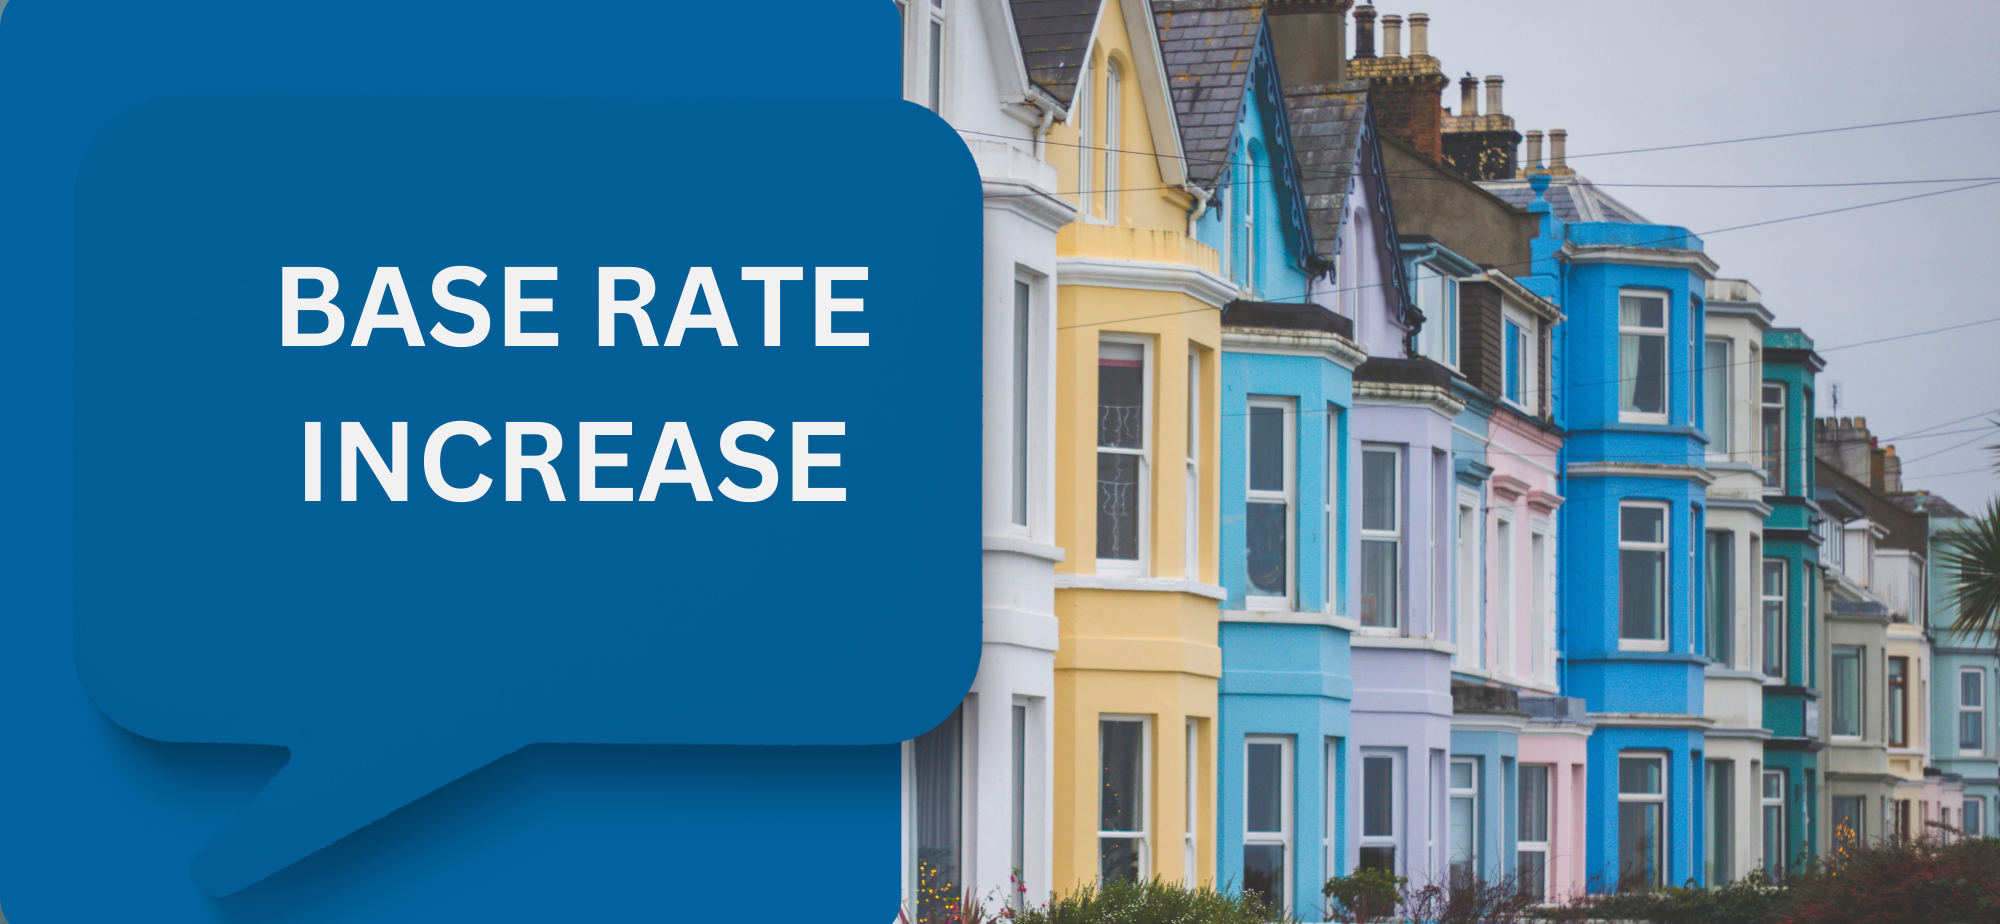 Bank of England increased the base rate to 4.5% 